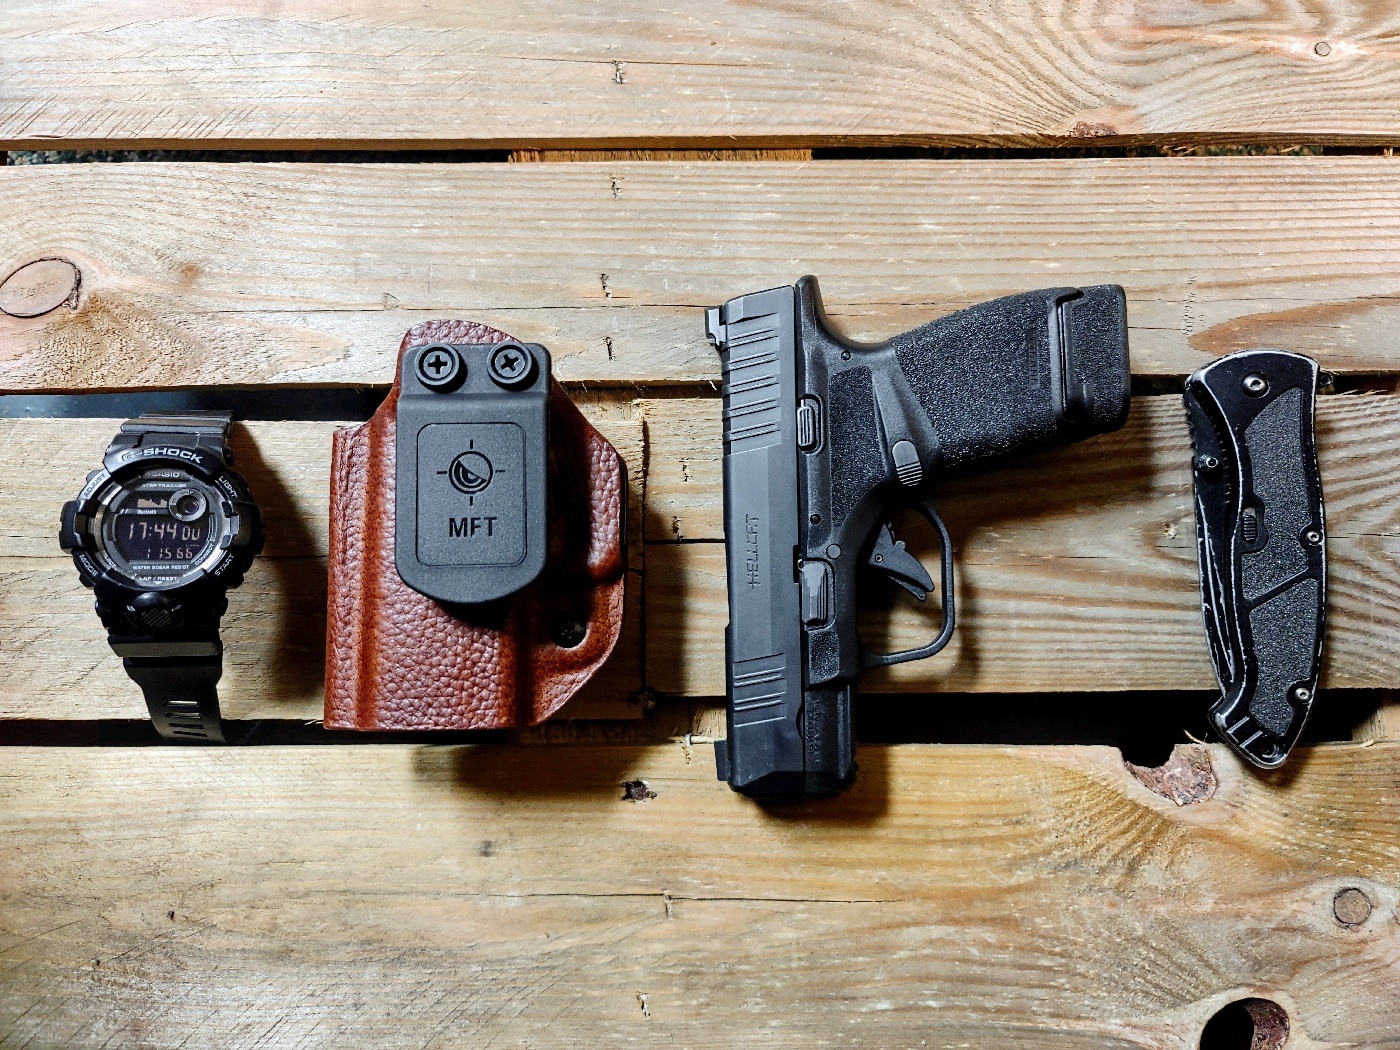 The photo shows a MFT holster along with a digital watch, a folding knife and a Springfield Armory Hellcat.